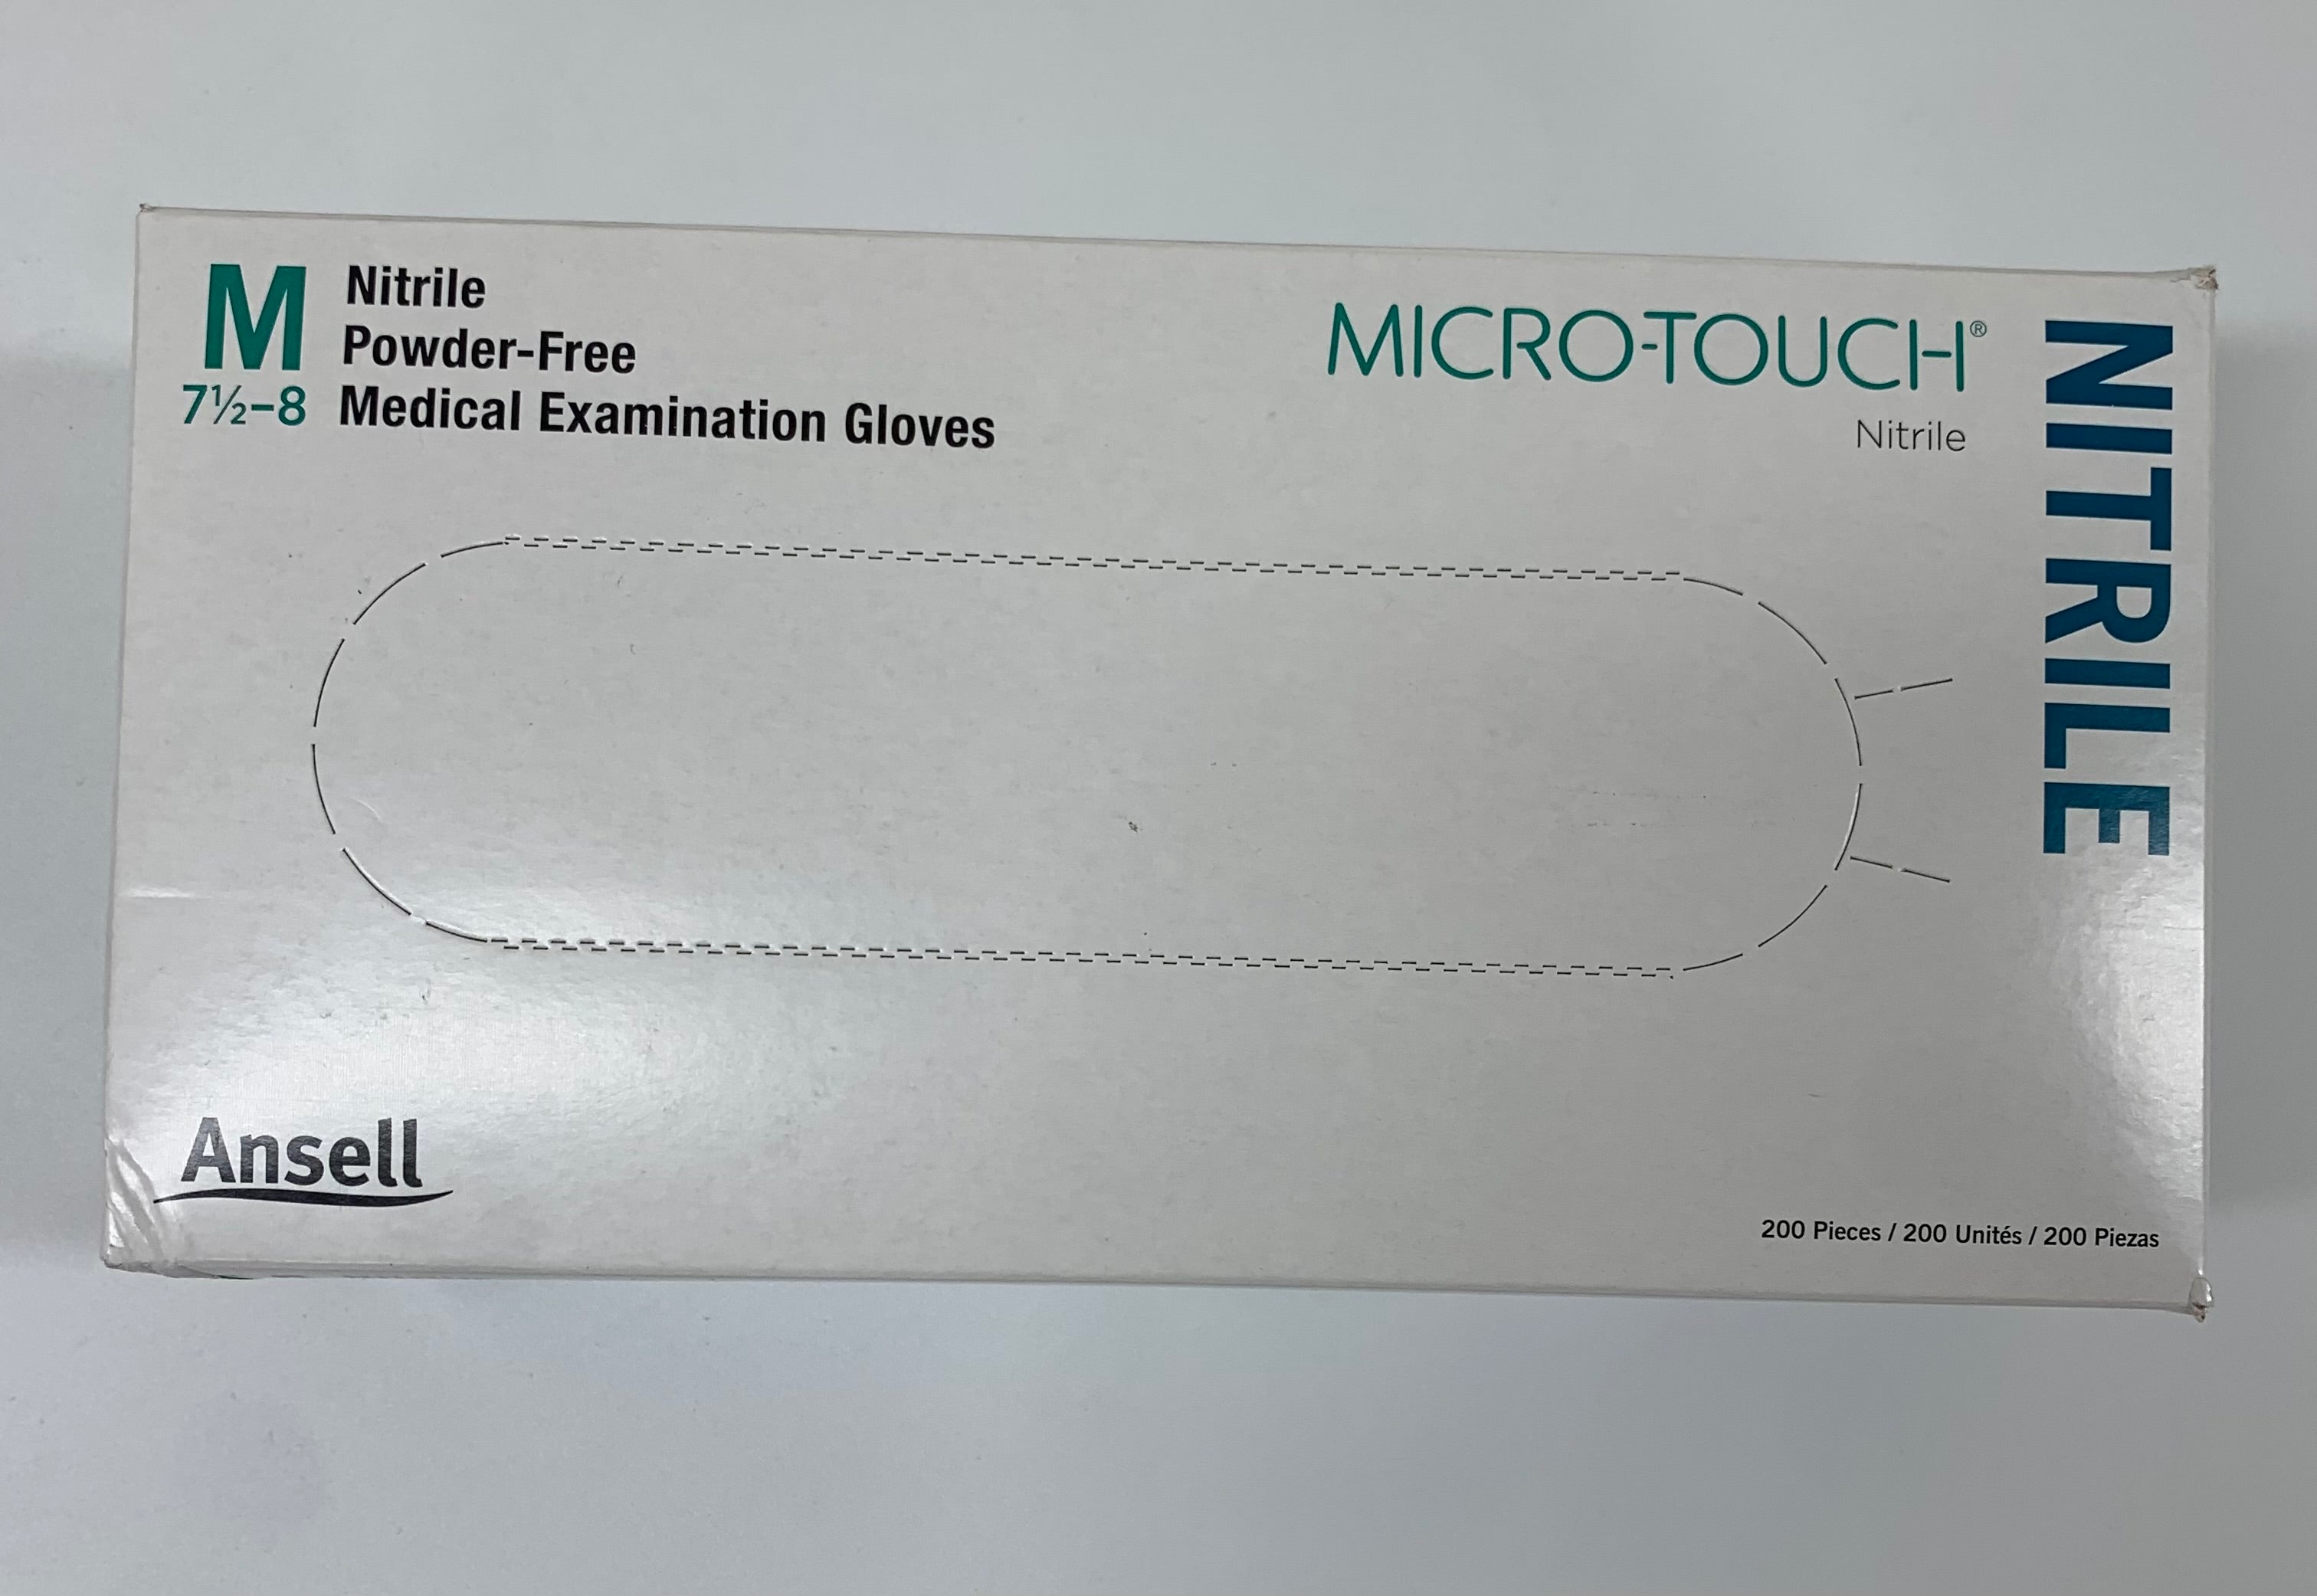 Ansell 6034302 Micro-Touch Gloves - Powder-Free Thin Nitrile Synthetic, Medium, 200 per Box